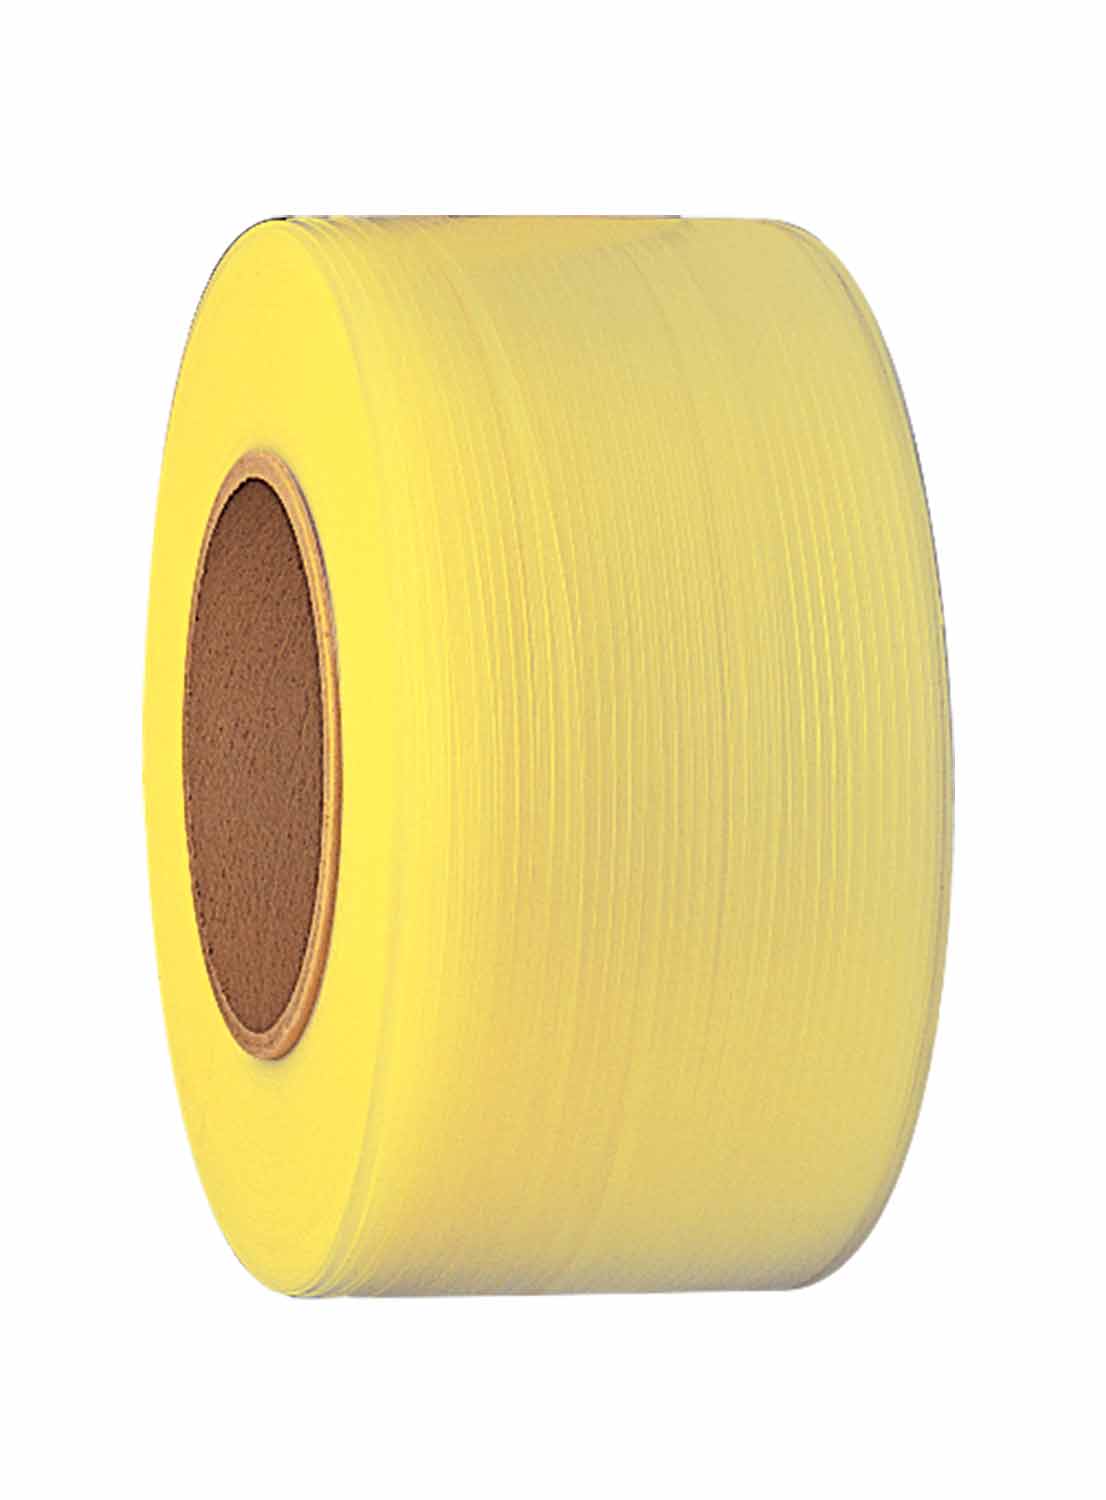 PLASTIC STRAPPING YELLOW
3/16&quot; (5mm)
120 LB. 8X8 POLYPROPYLENE
SIGNODE CONTRAX WITH
REFLECTORS